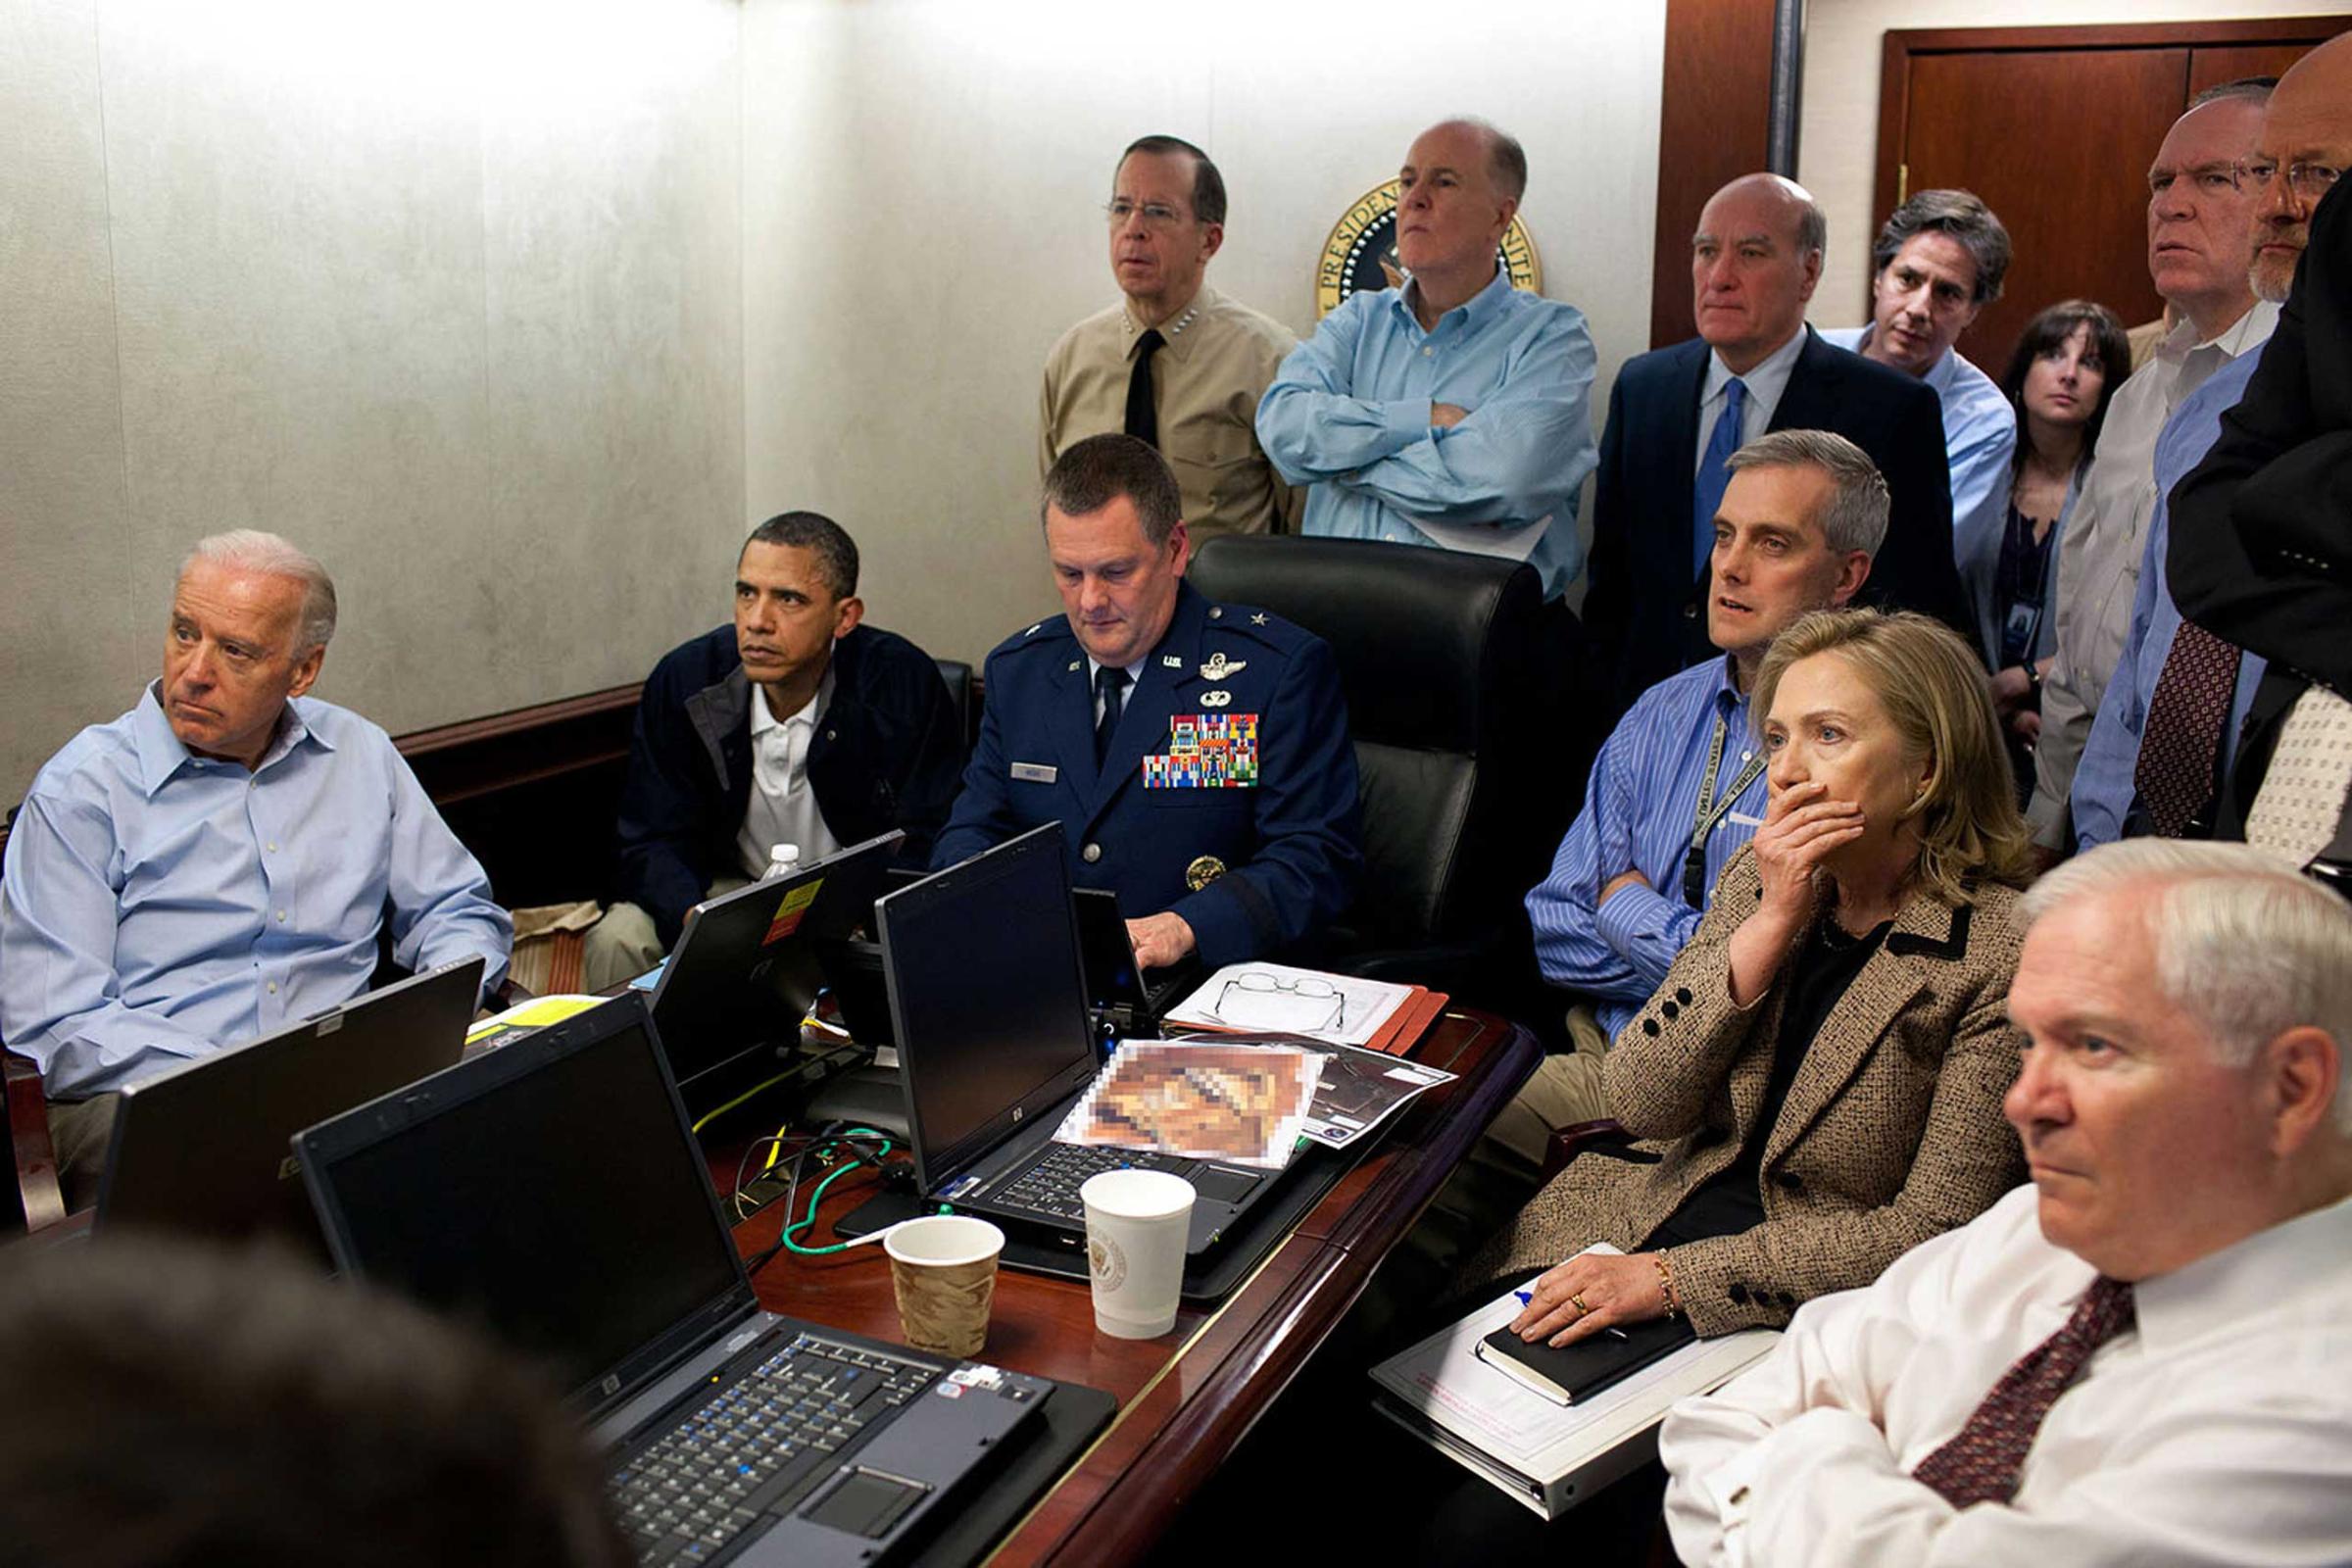 "Much has been made of this photograph that shows the President and Vice President and the national security team monitoring in real time the mission against Osama bin Laden, May 1, 2011. Some more background on the photograph: The White House Situation Room is actually comprised of several different conference rooms. The majority of the time, the President convenes meetings in the large conference room with assigned seats. But to monitor this mission, the group moved into the much smaller conference room. The President chose to sit next to Brigadier General Marshall B. ÒBradÓ Webb, Assistant Commanding General of Joint Special Operations Command, who was point man for the communications taking place. With so few chairs, others just stood at the back of the room. I was jammed into a corner of the room with no room to move. During the mission itself, I made approximately 100 photographs, almost all from this cramped spot in the corner. Please note: a classified document seen in front of Sec. Clinton has been obscured."